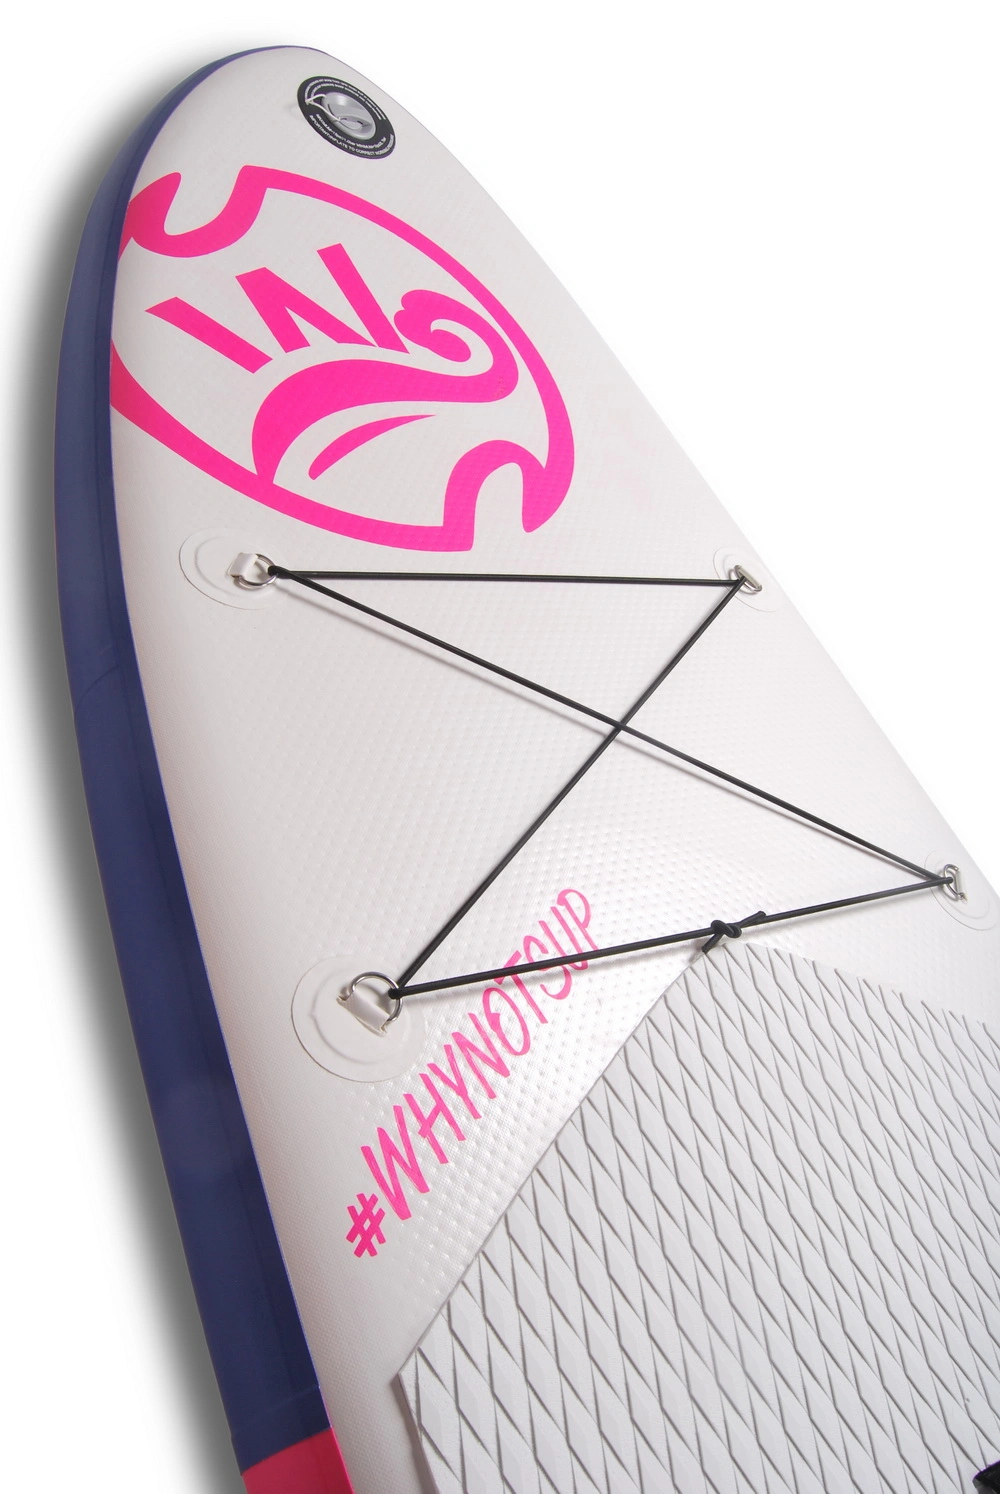 Inflatable Sup Stand up Paddle Board Sup Manufacturer